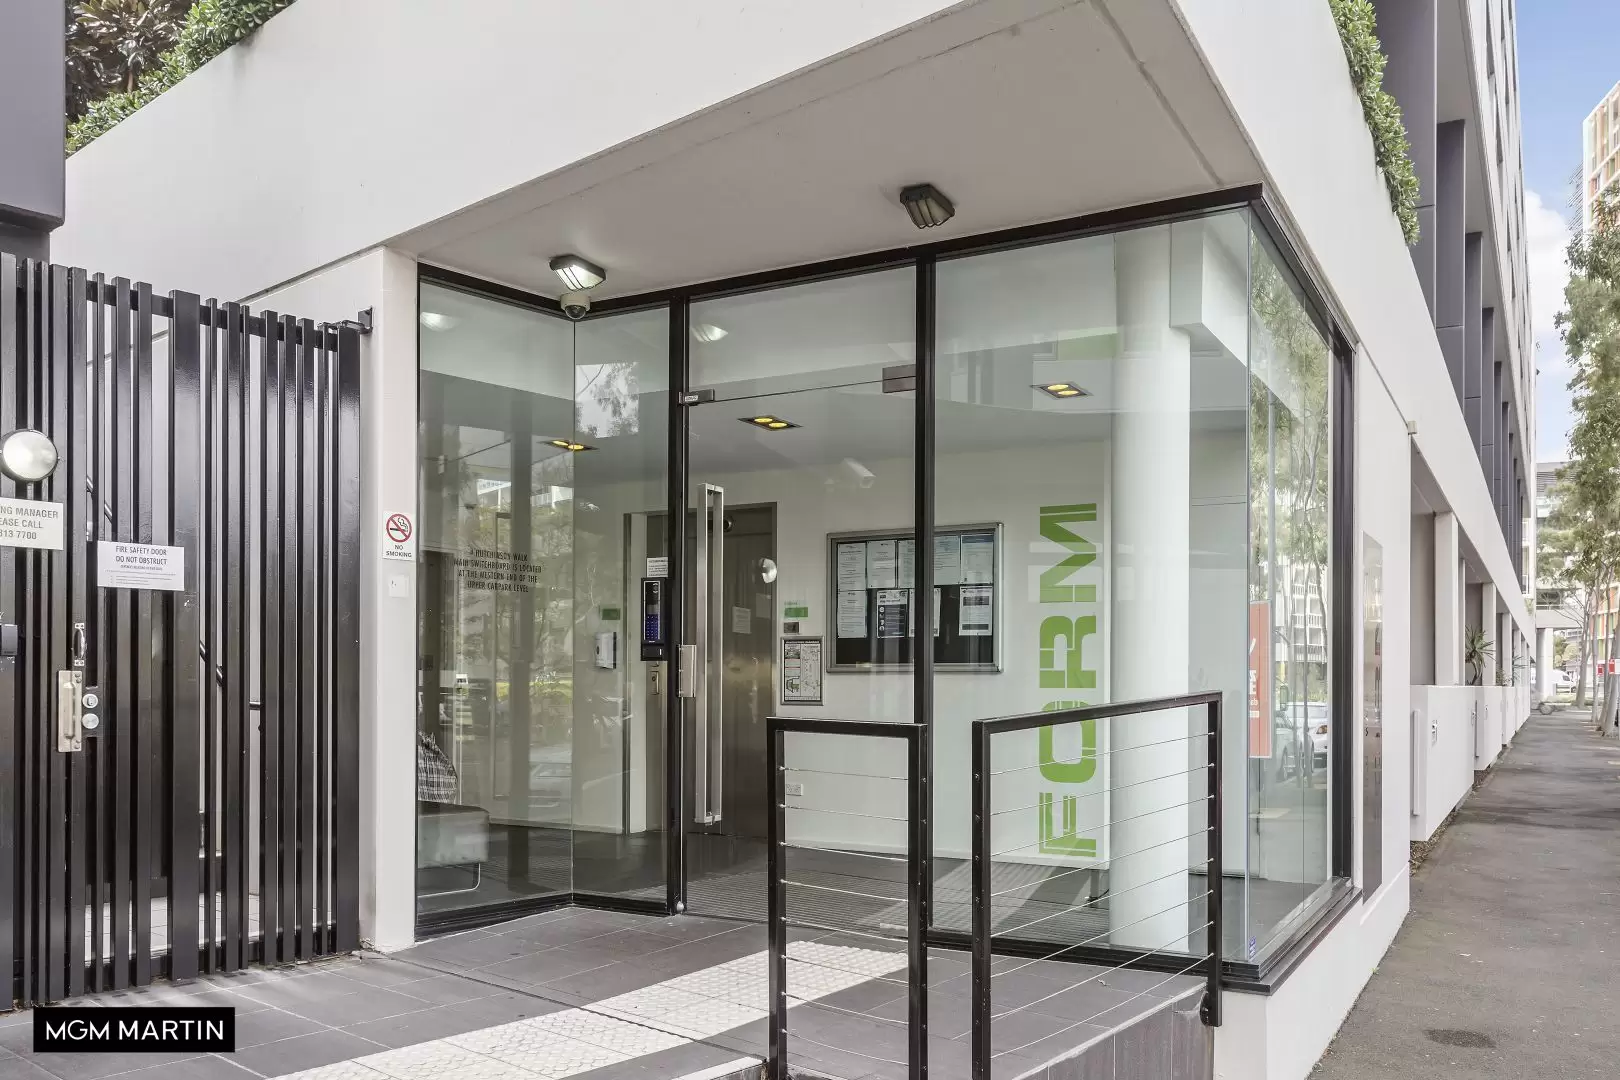 23/4 Hutchinson Walk, Zetland For Lease by MGM Martin - image 1